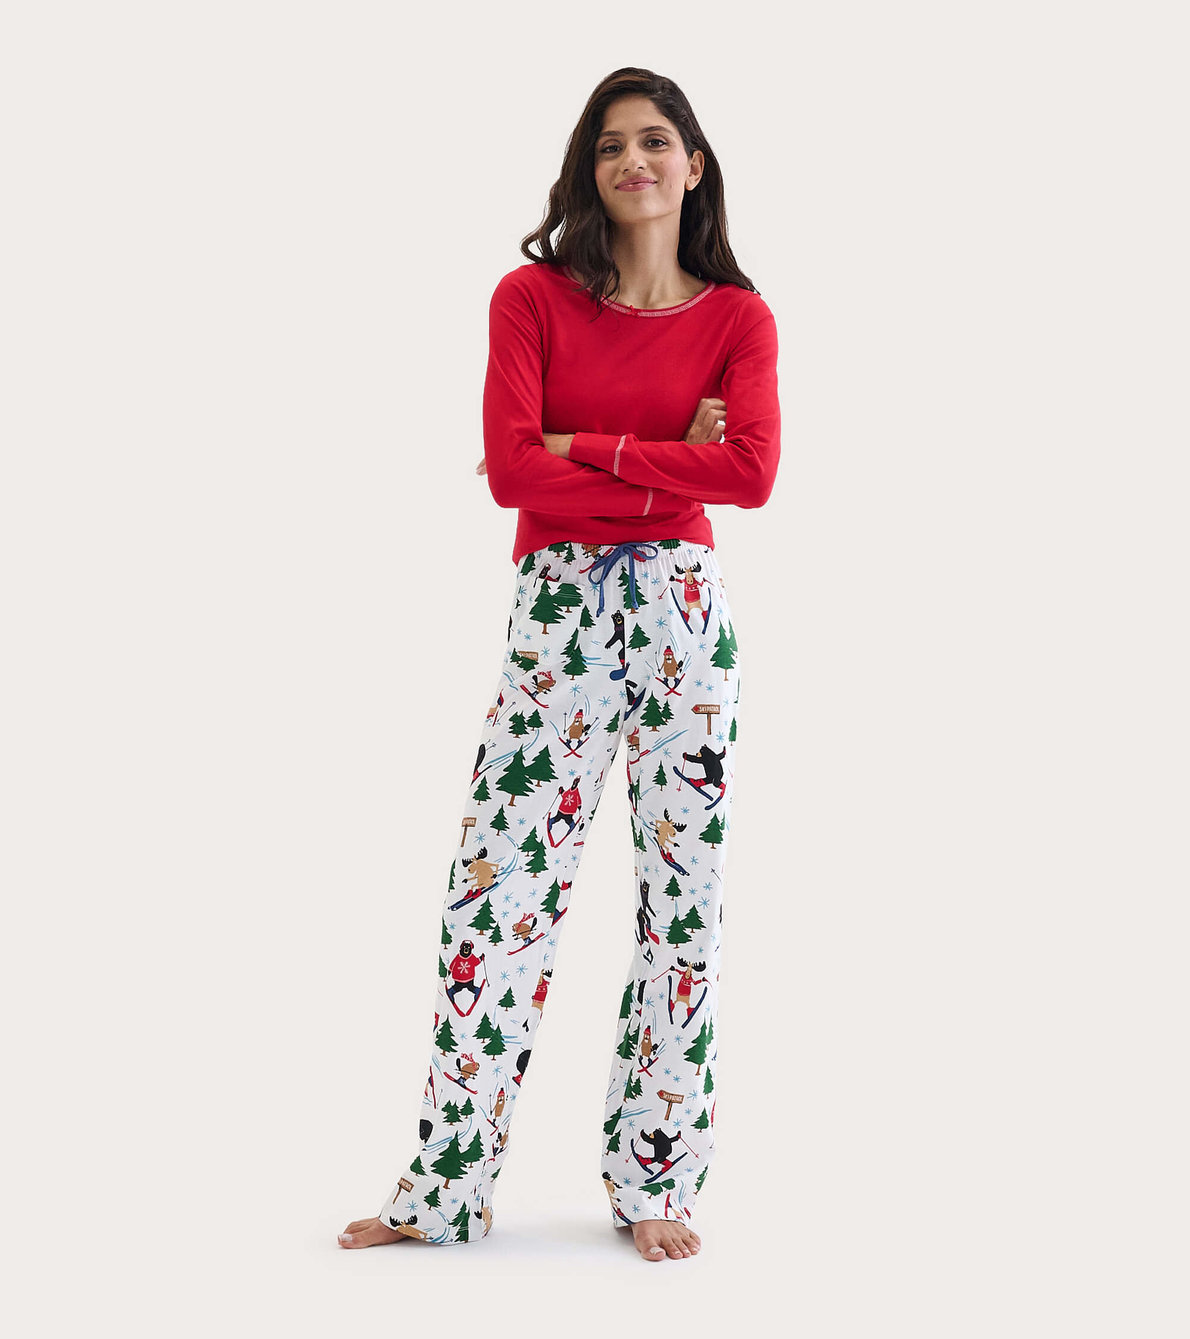 View larger image of Wild About Skiing Women's Tee and Pants Pajama Separates